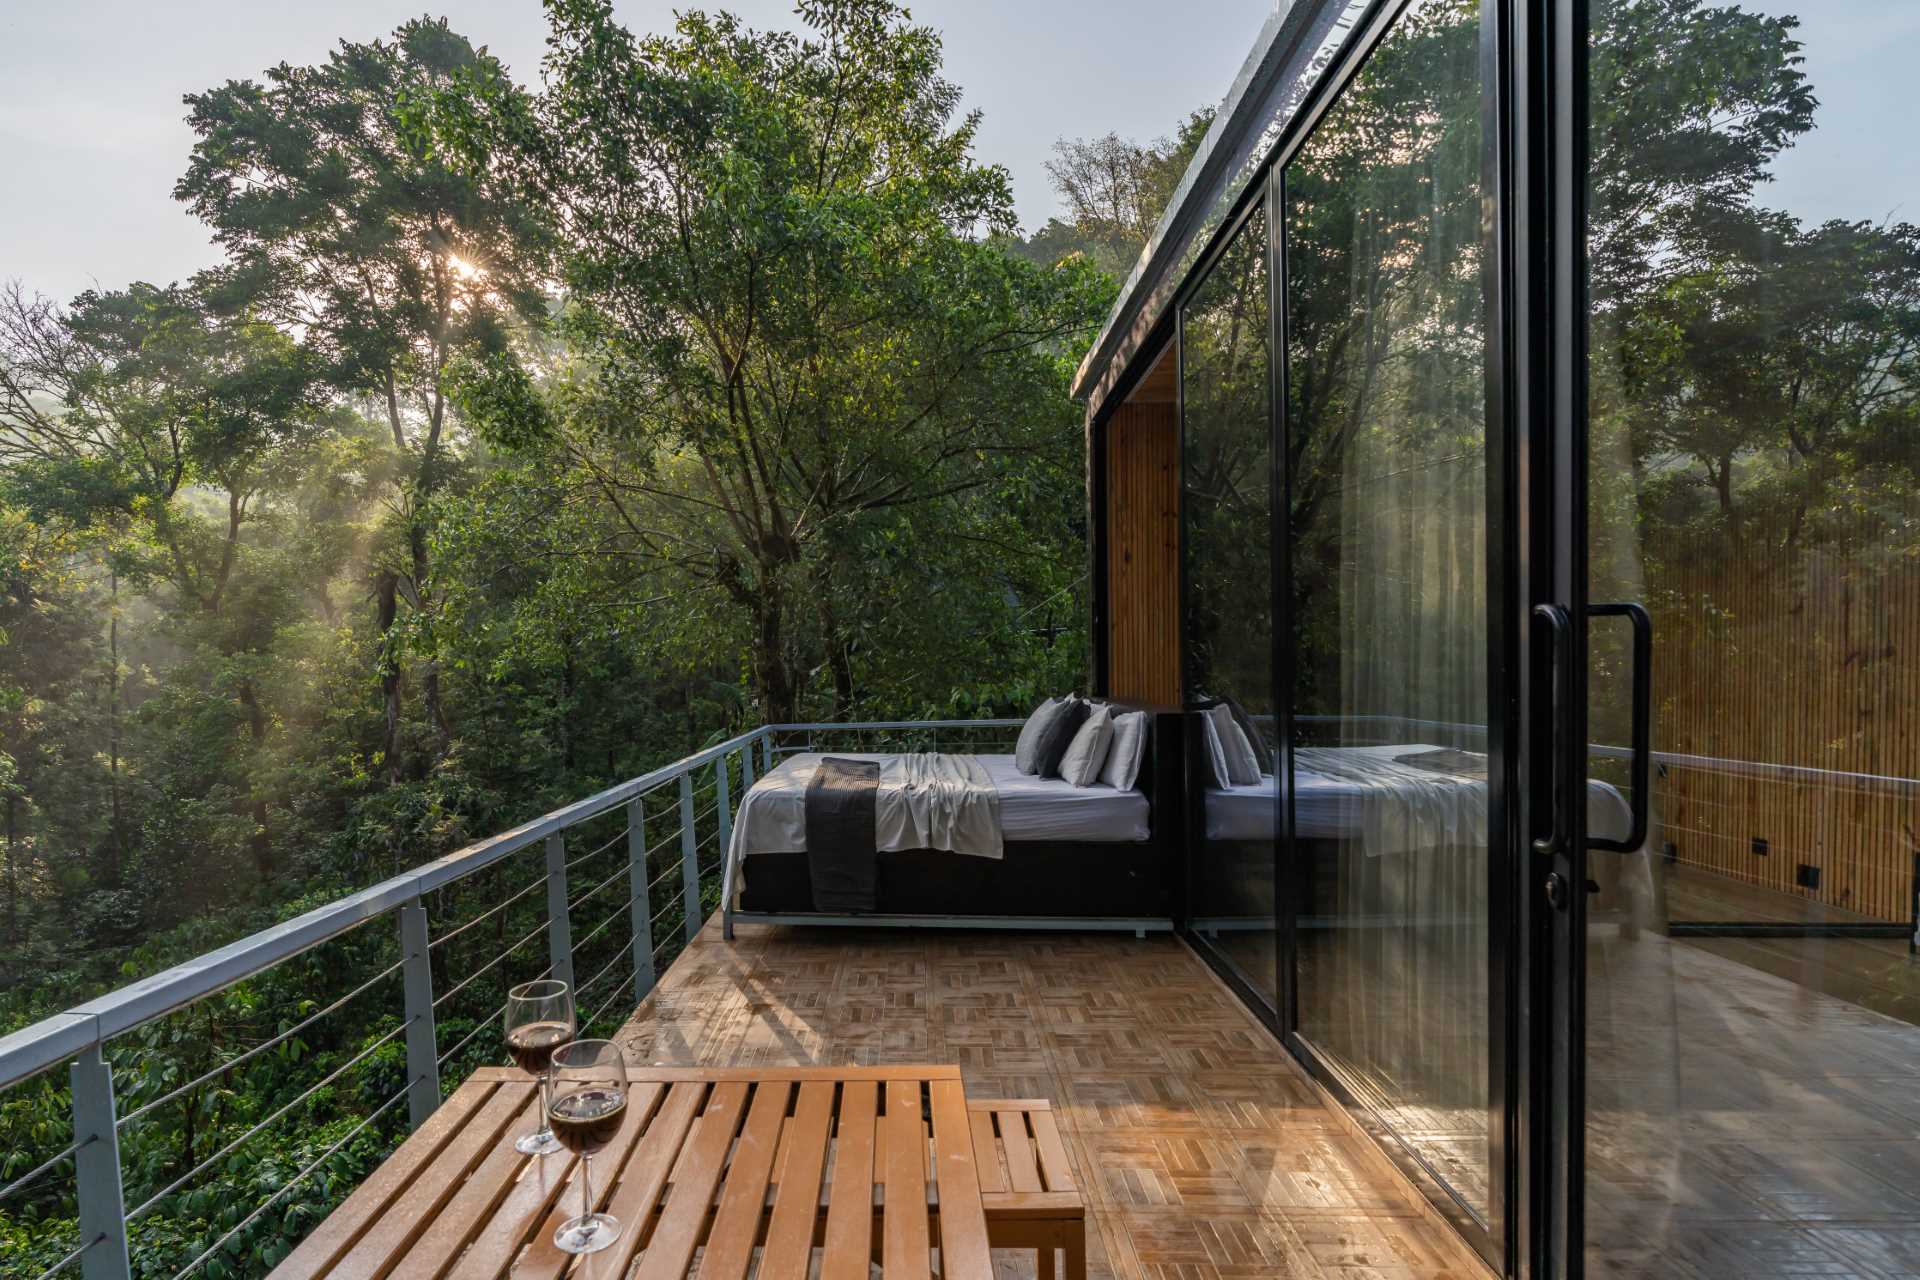 A small and modern cabin with a mirrored facade, also includes a slide-out bed that can be inside or outside on the deck.